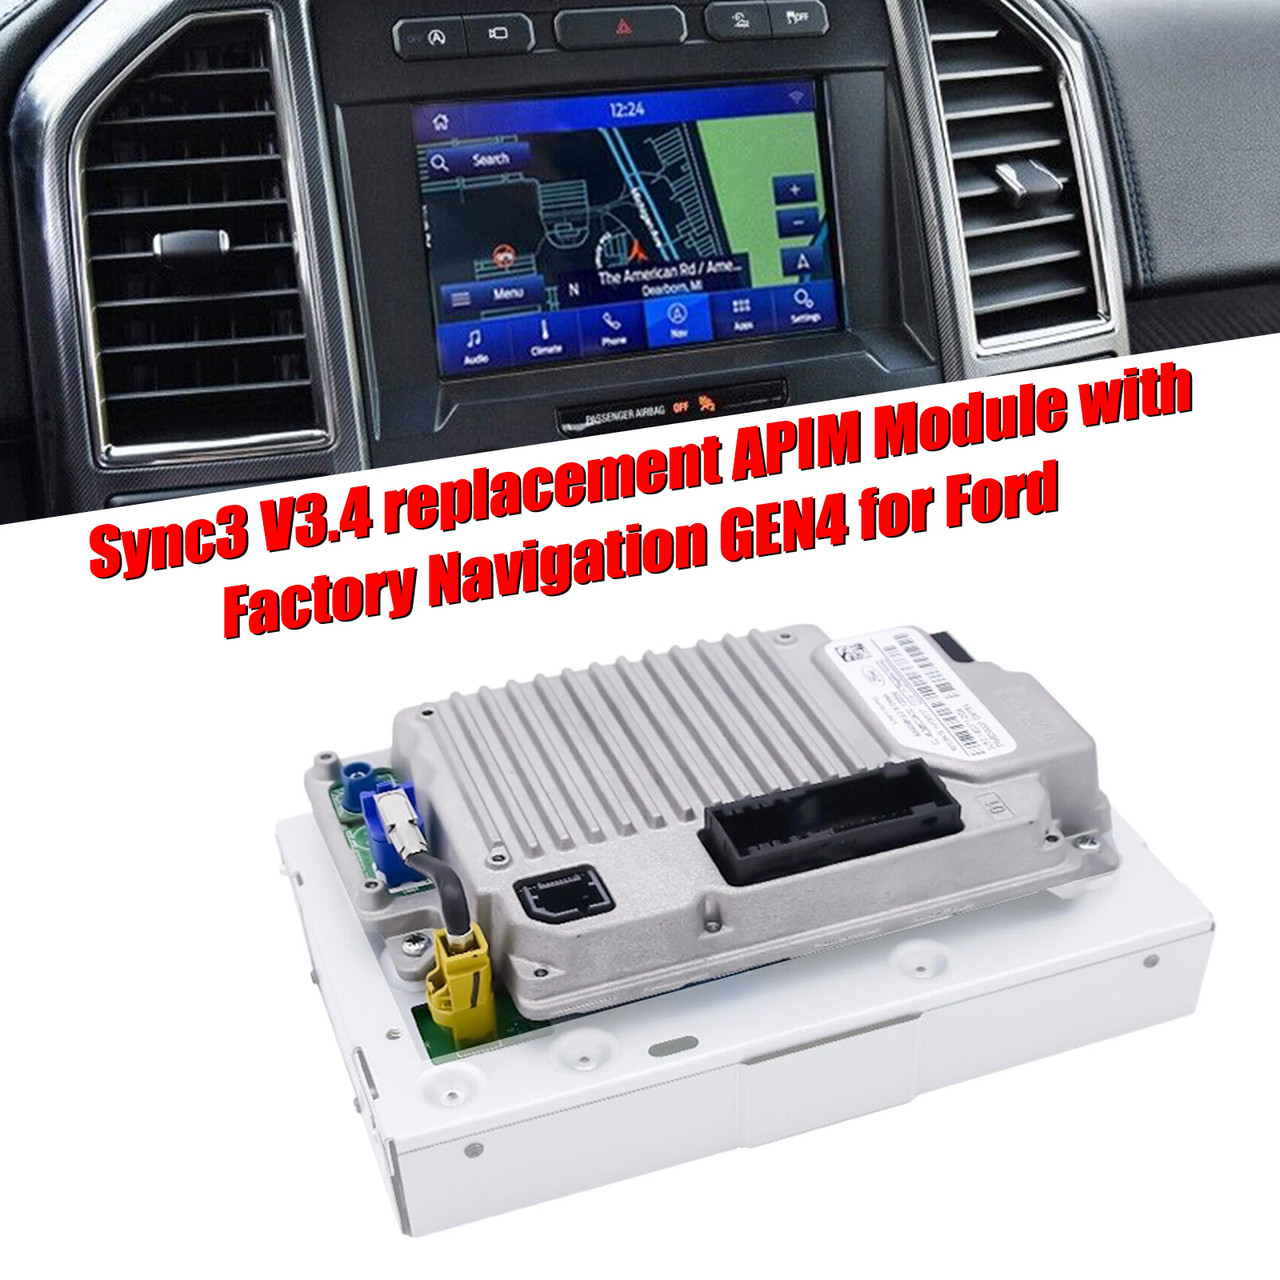 Sync3 V3.4 replacement APIM Module with Factory Navigation GEN4 for Ford